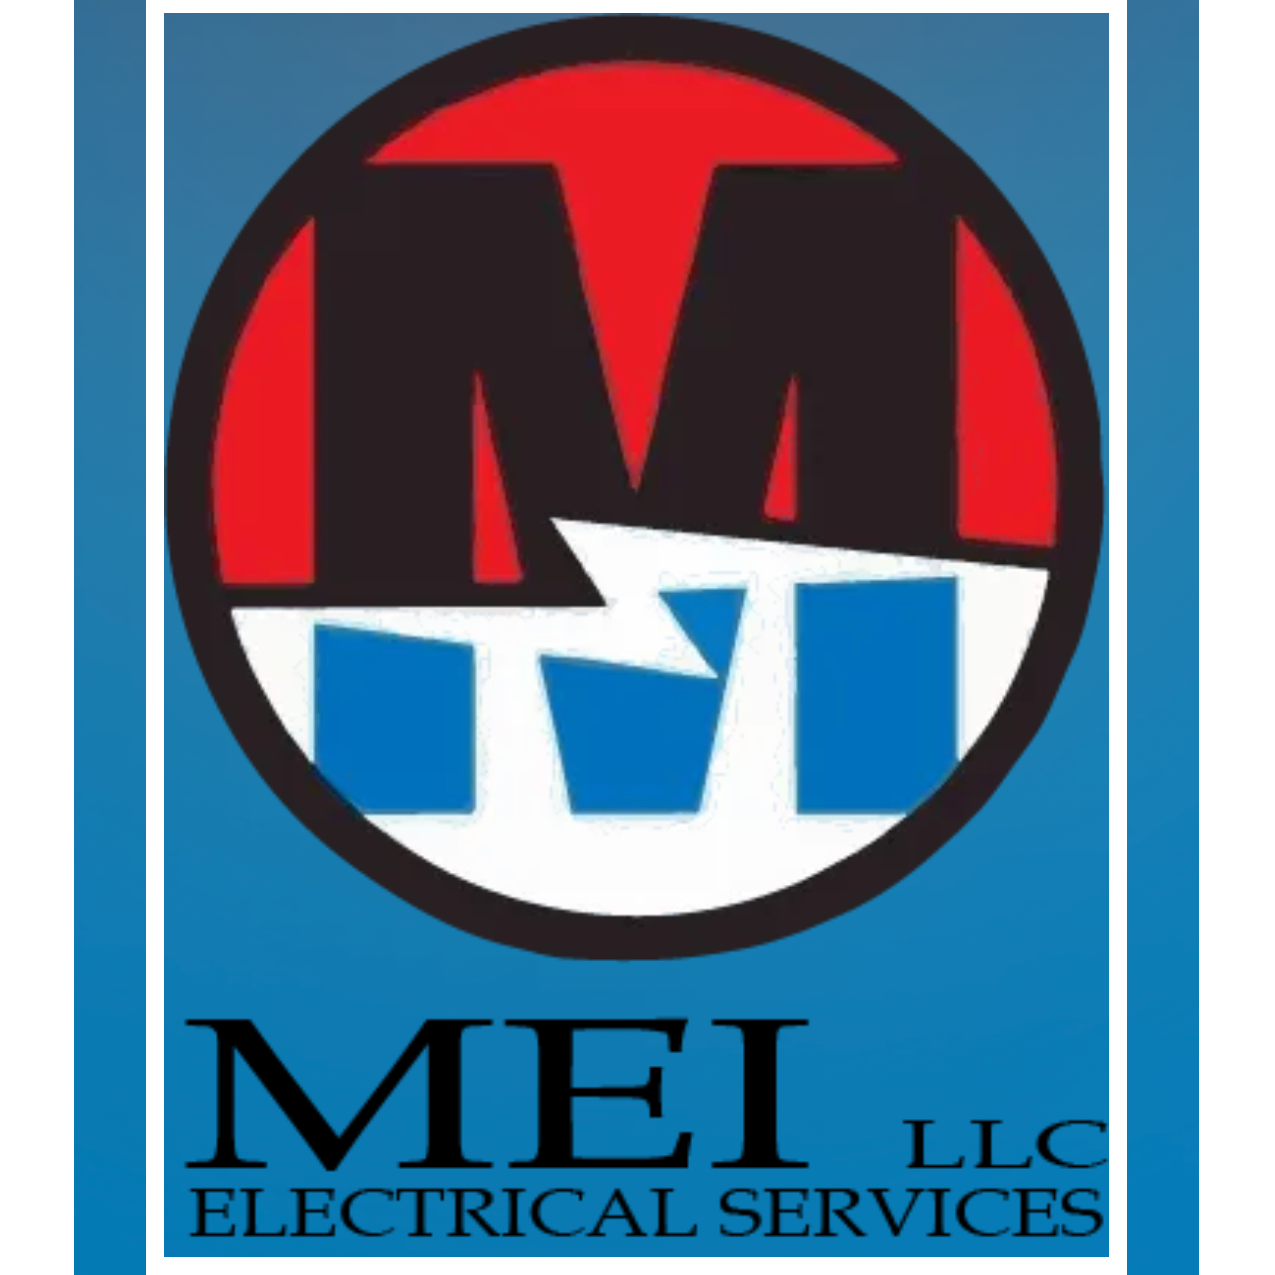 MEI Electrical Services